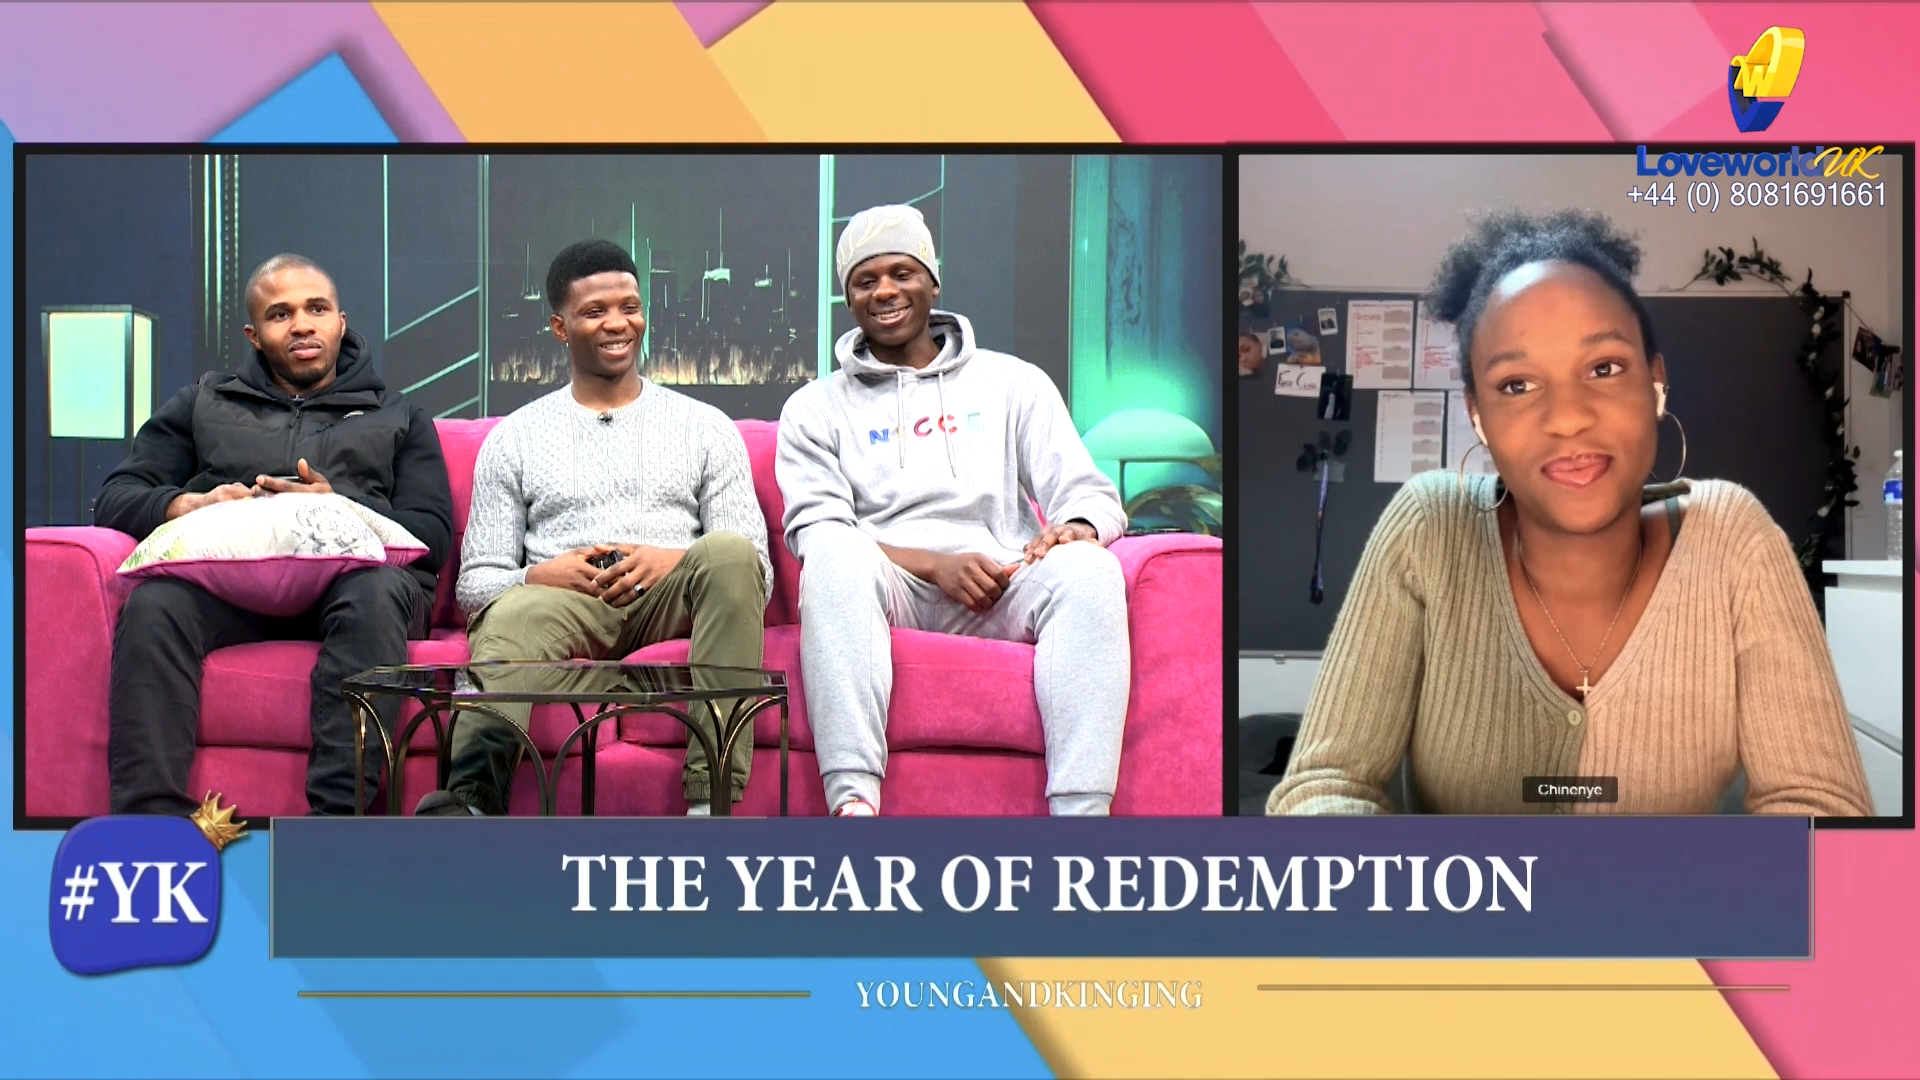 EPISODE 6 - THE YEAR OF REDEMPTION